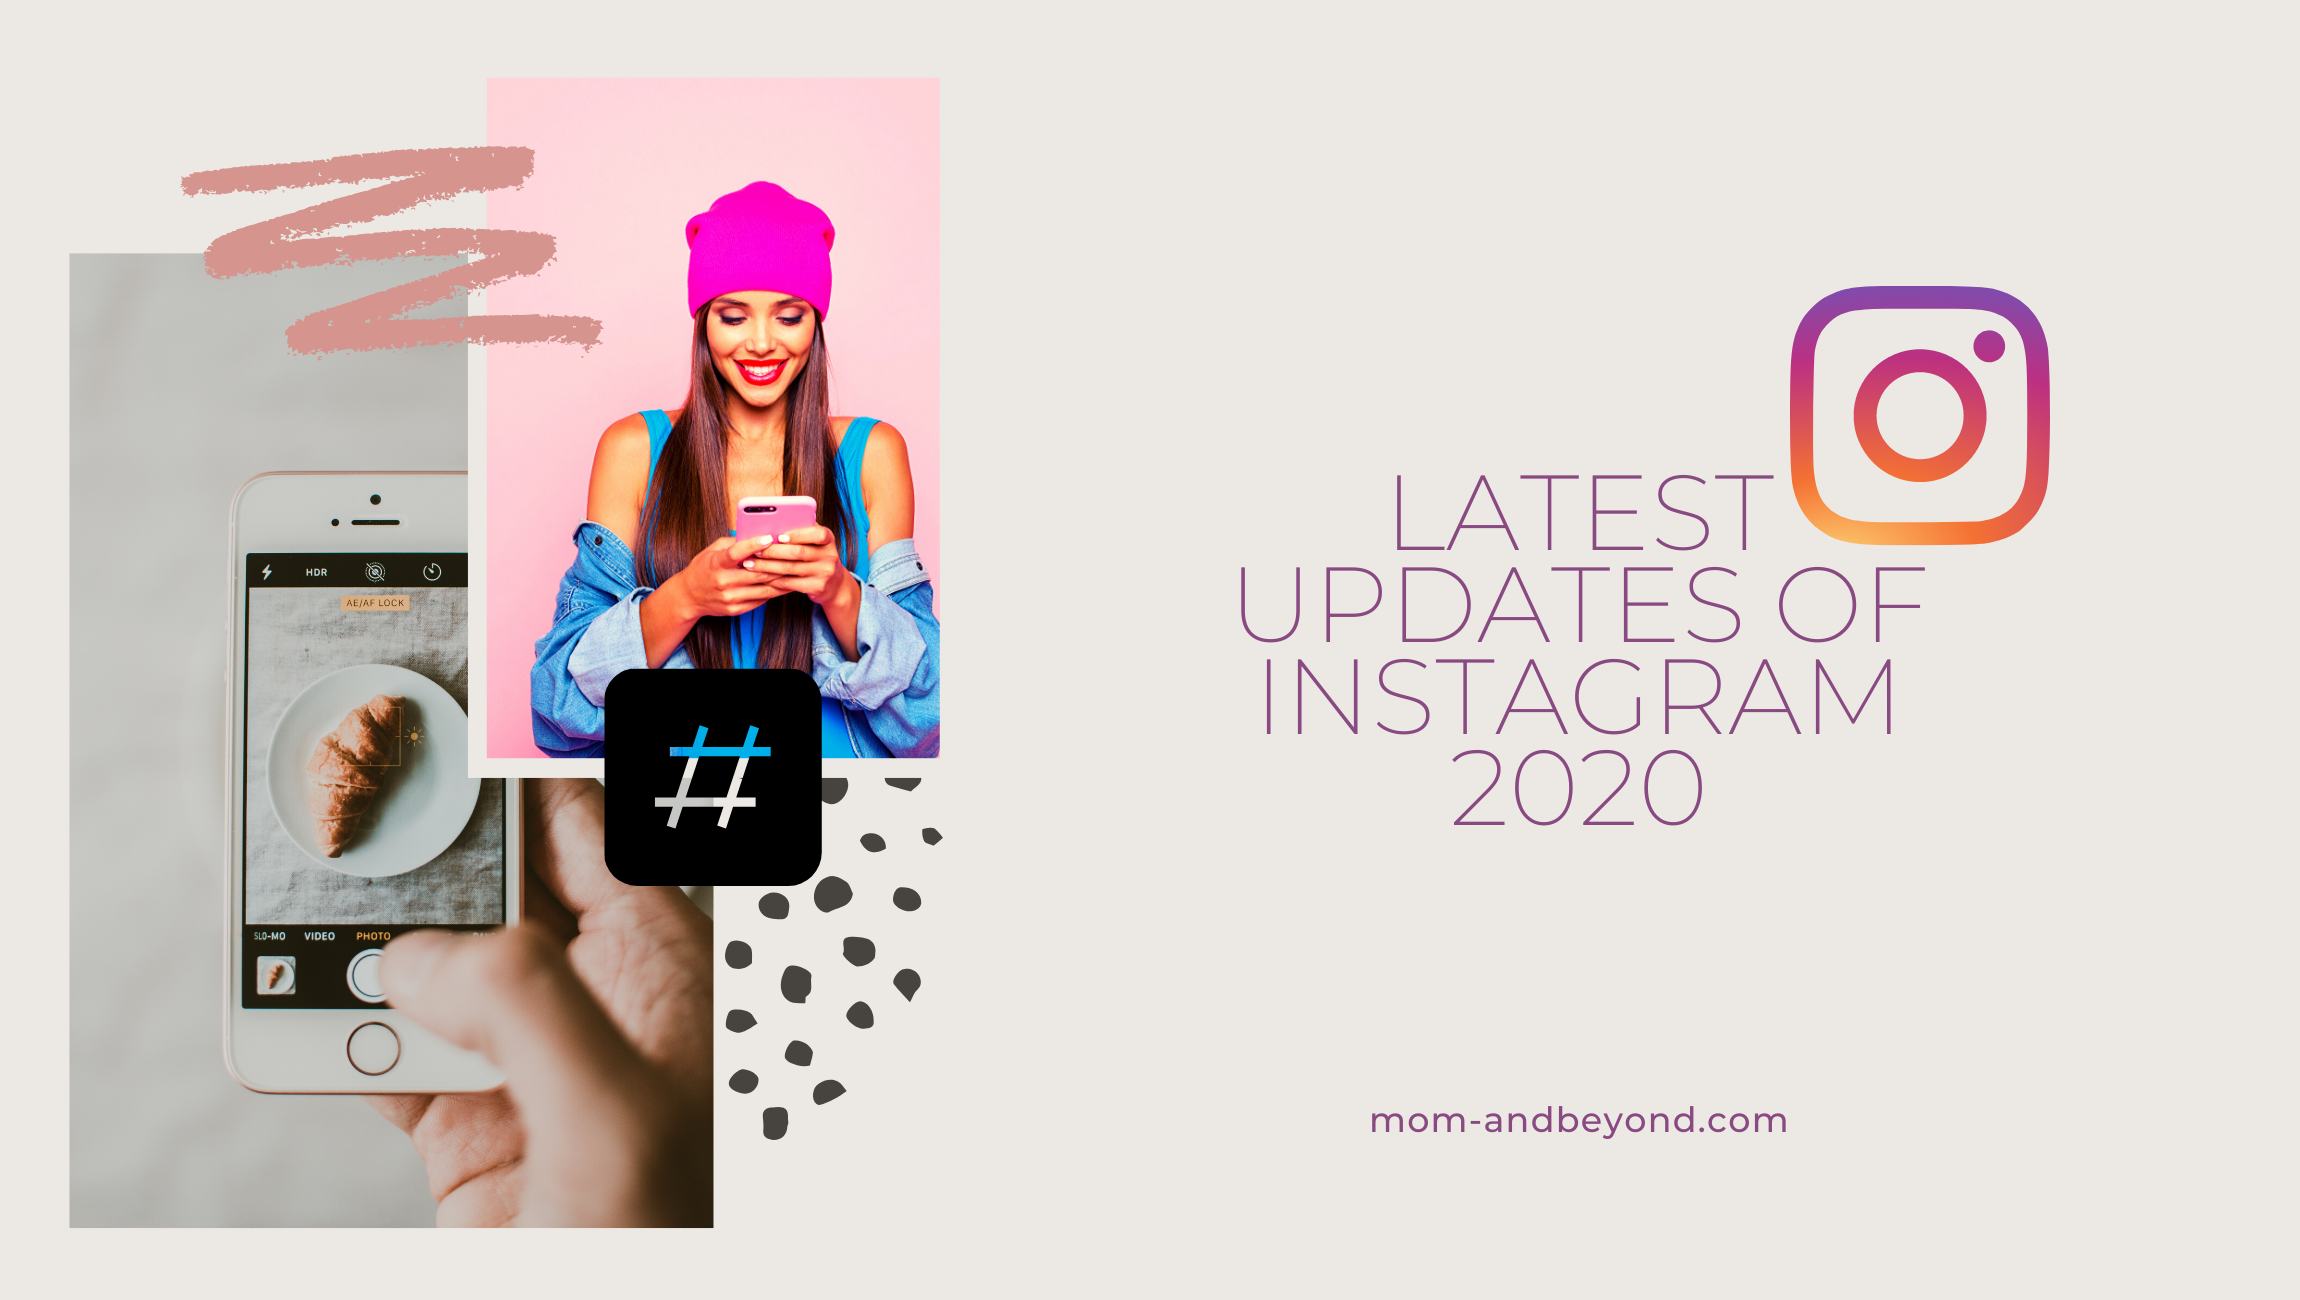 Latest Instagram Updates To Lookout For in 2020